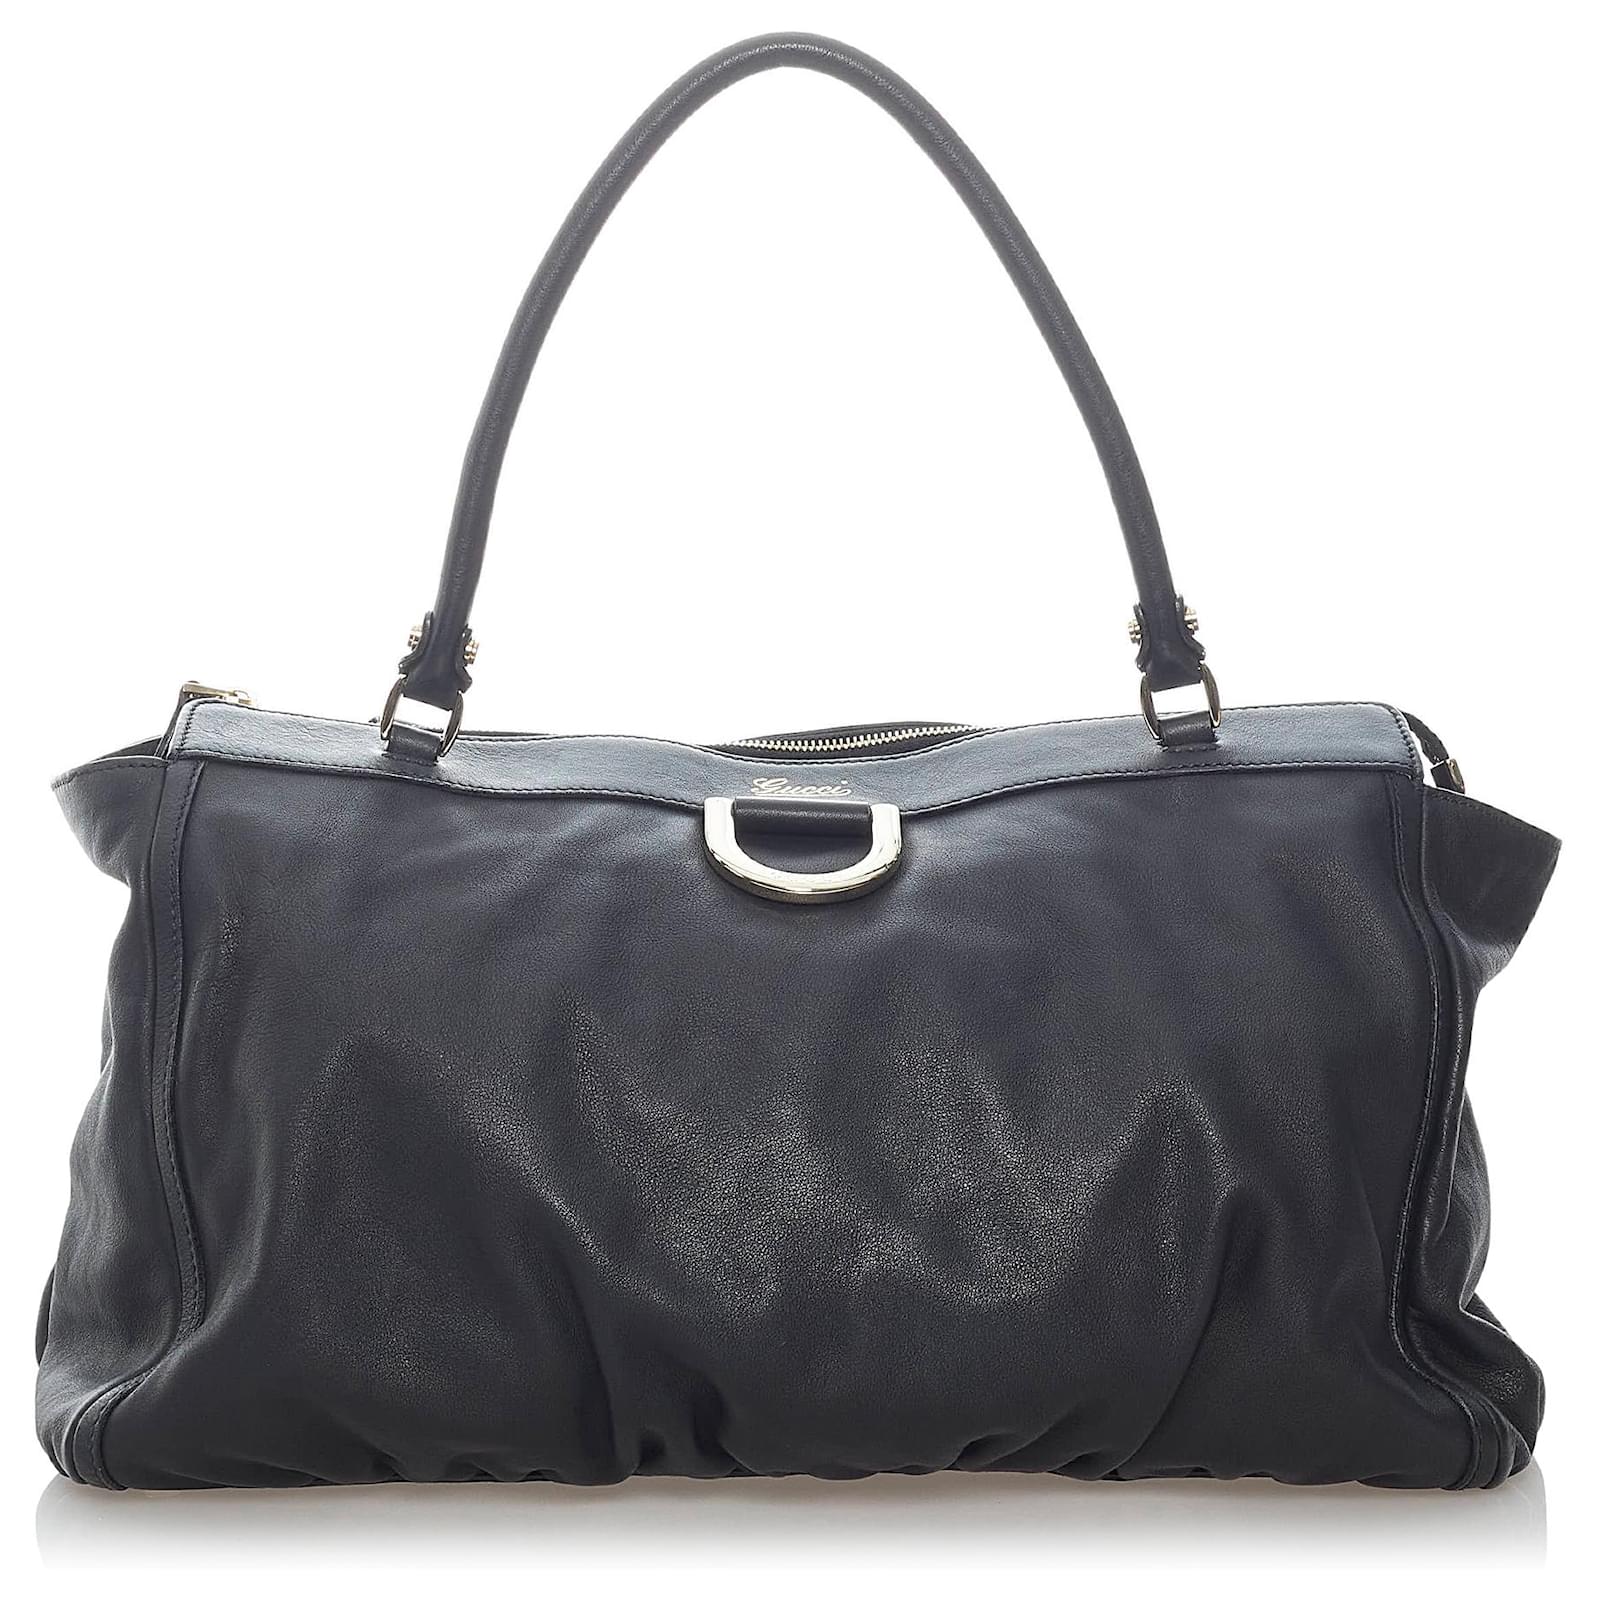 Gucci Black Abbey D-ring Leather Tote Bag Pony-style calfskin ref ...